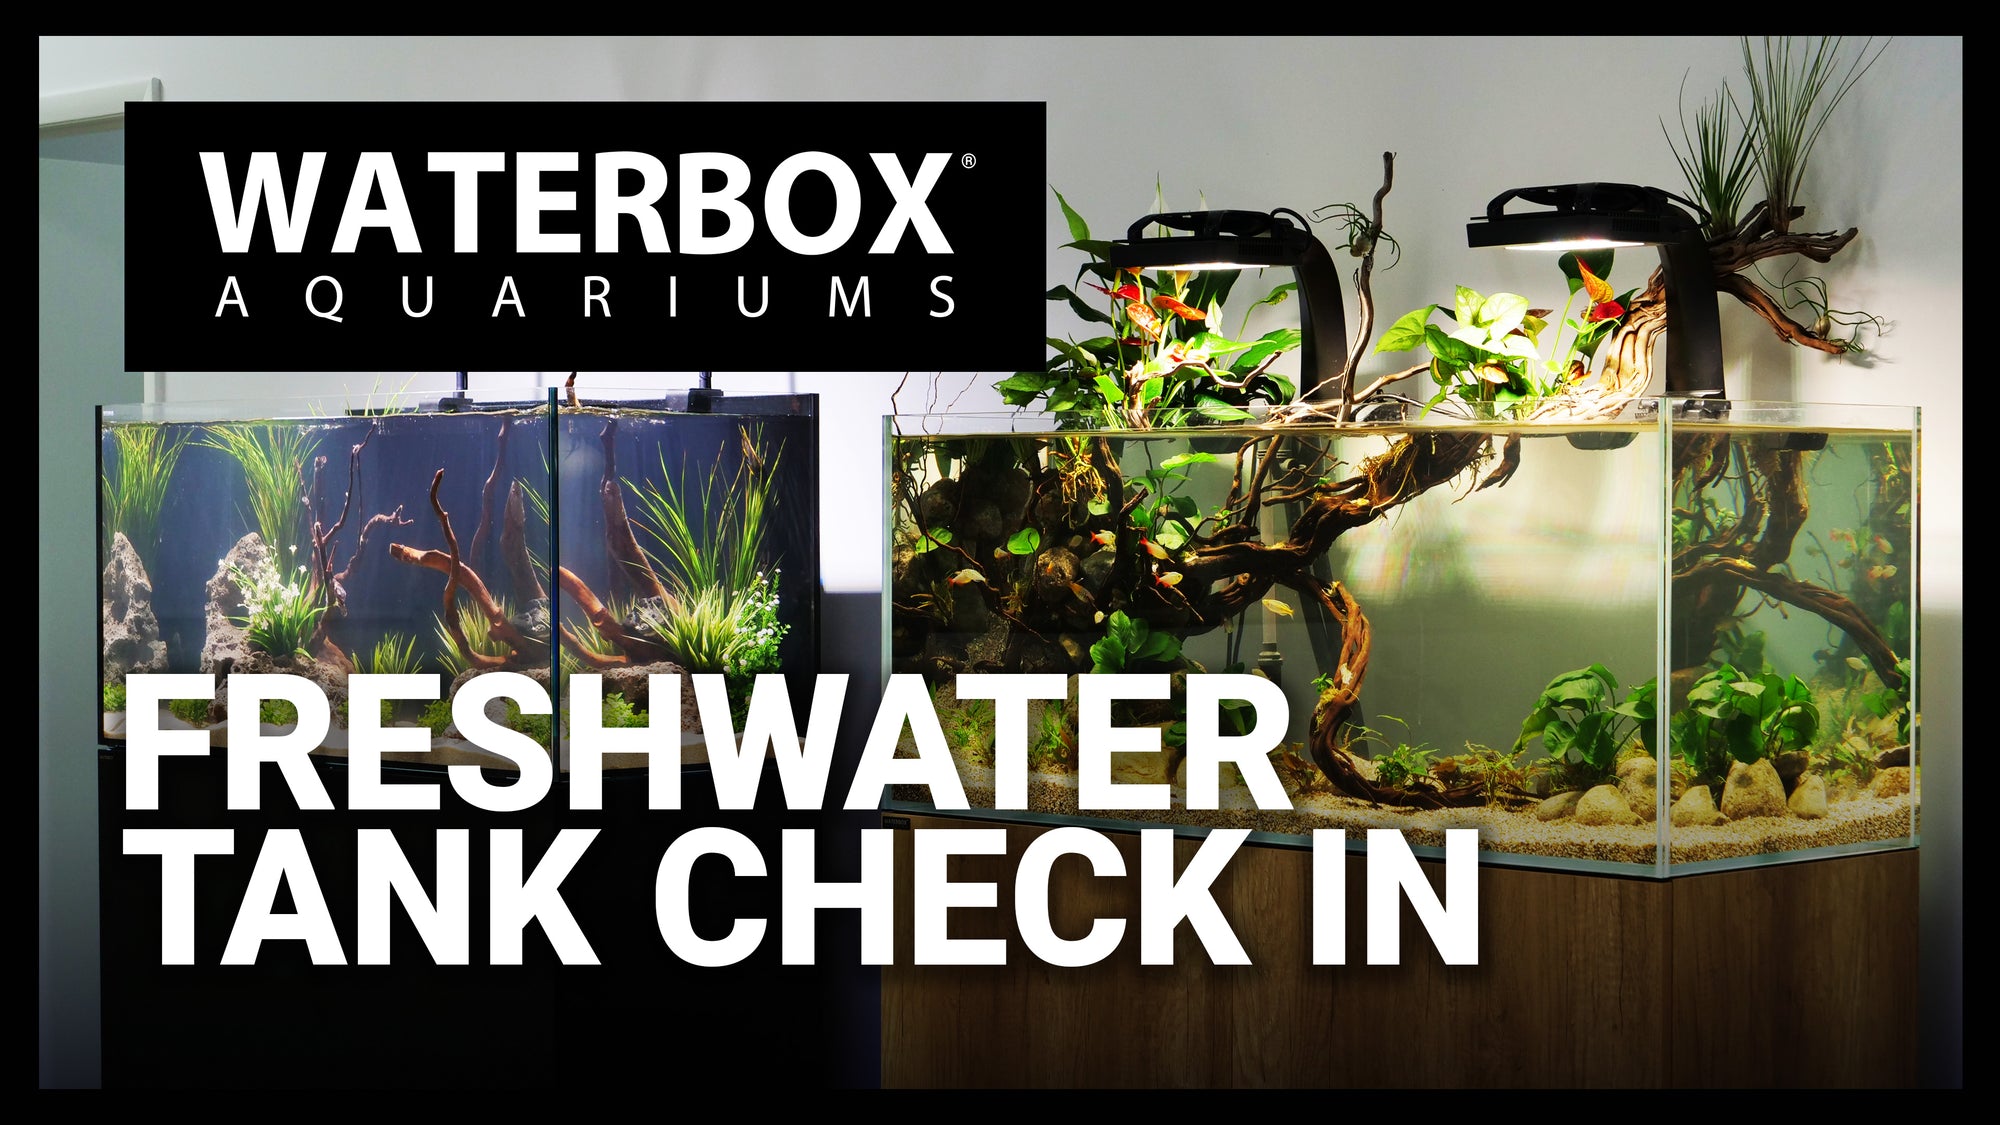 What to expect when starting a freshwater Aquarium.